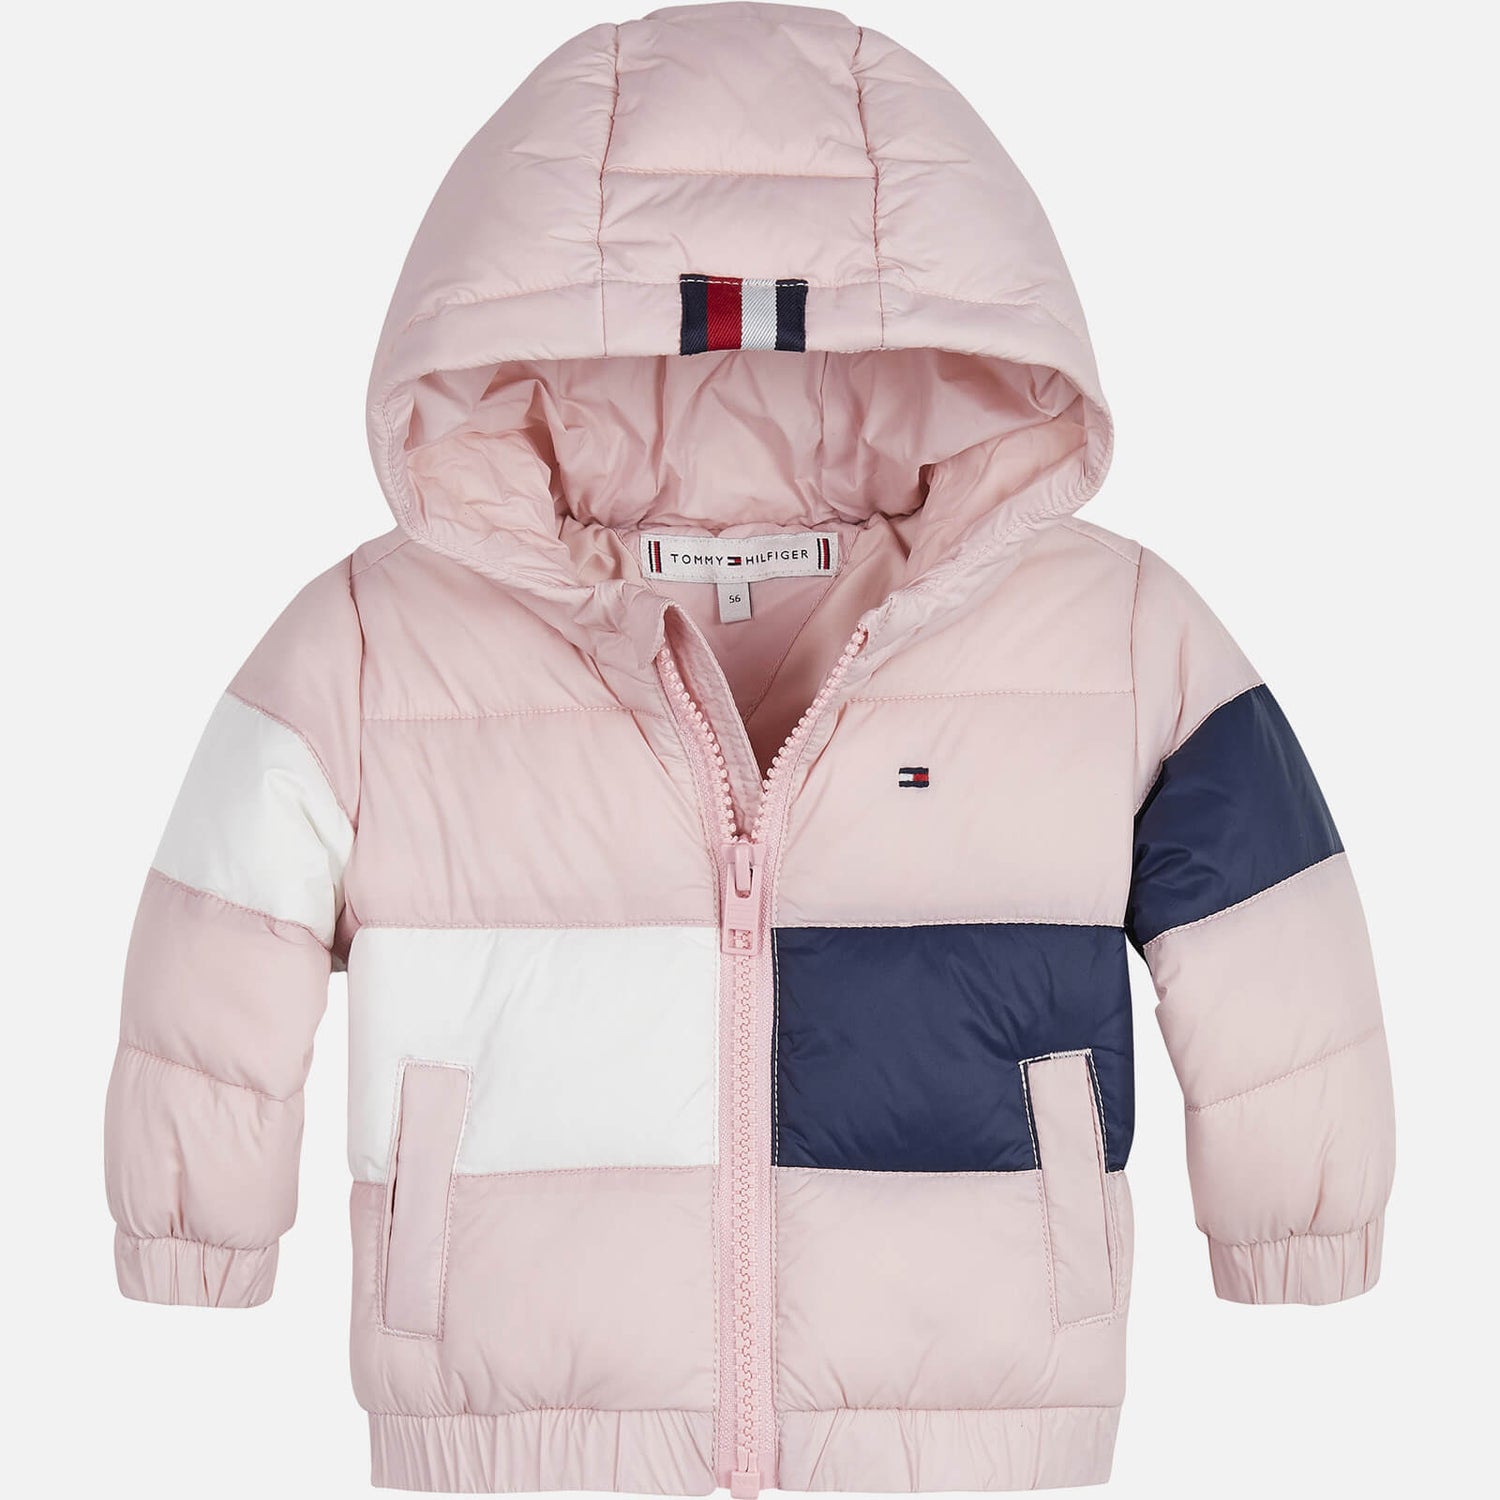 Tommy Hilfiger Baby Colourblock Puffer Coat - Delicate Pink